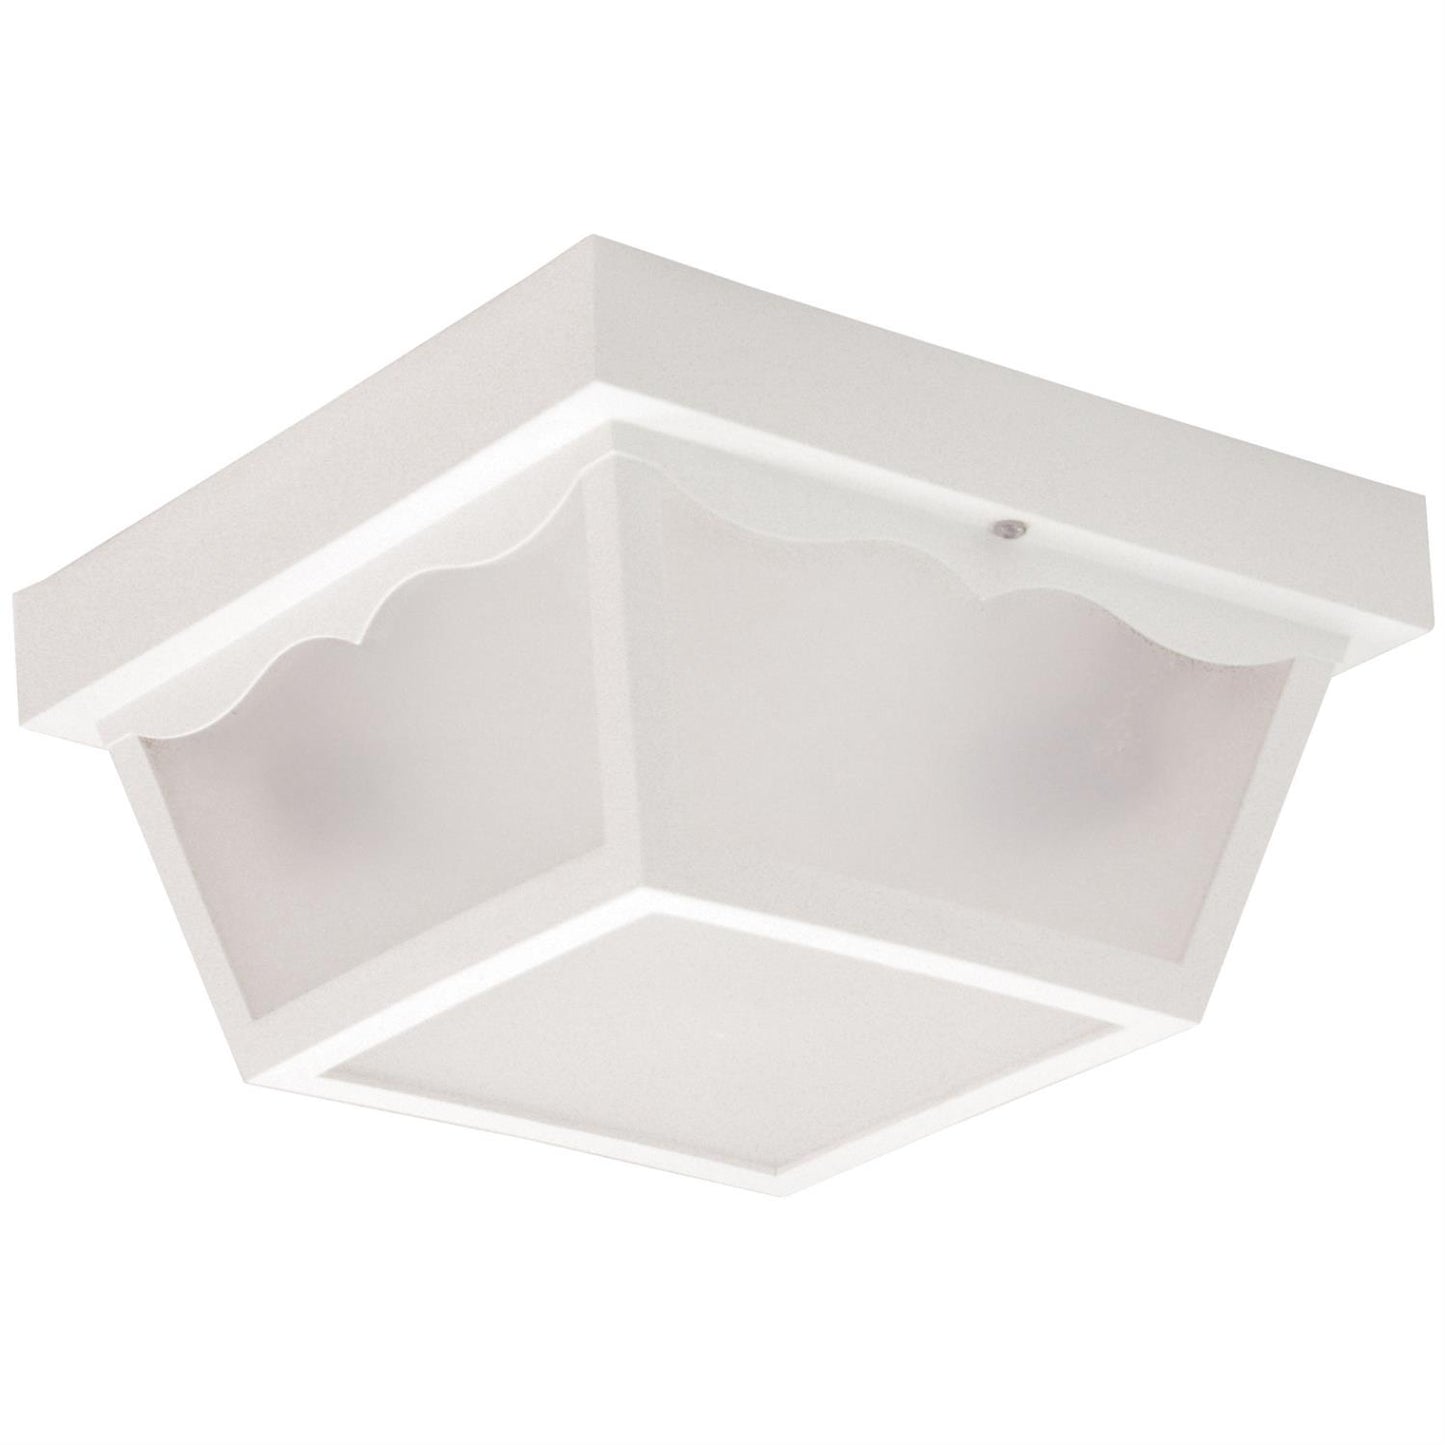 Sunlite Decorative Outdoor Energy Saving Century Collection Fixture, White Finish, Frosted Lens